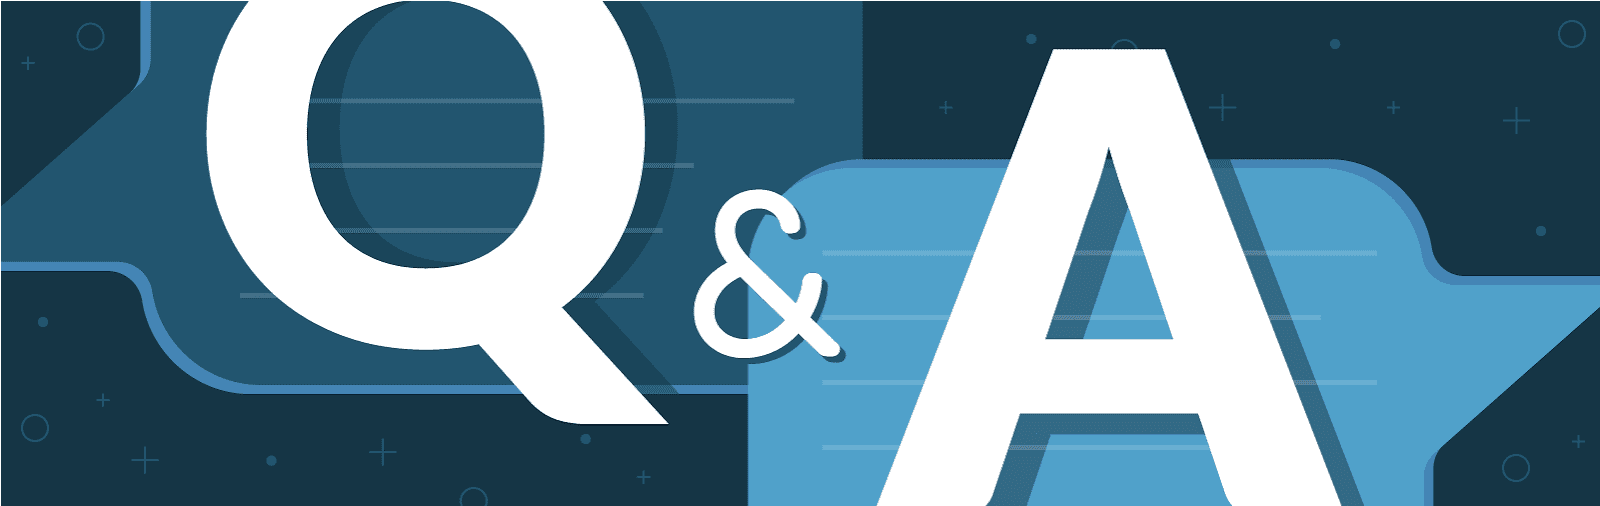 icons of speech bubbles with the text "Q&A" overlaid.